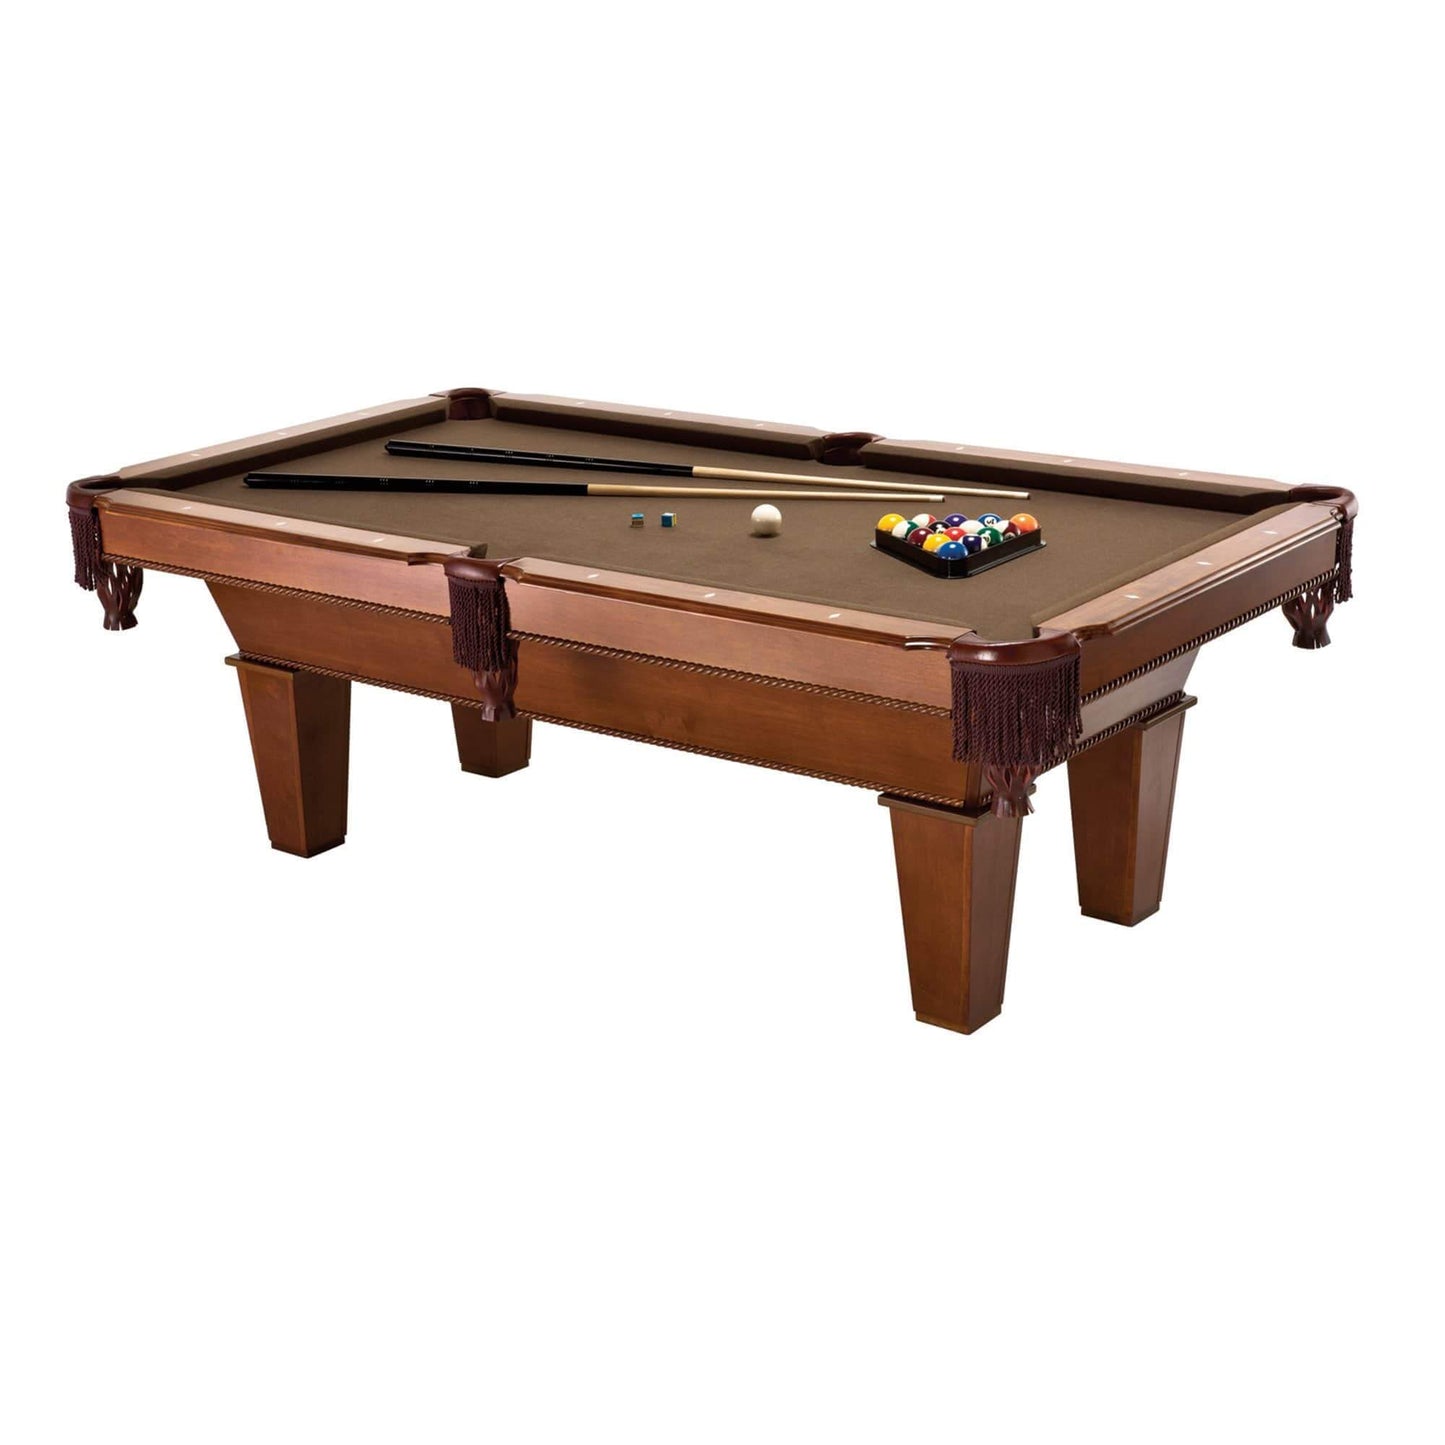 Billiards - Fat Cat Frisco 7.5' Billiard Table With Play Package in white background